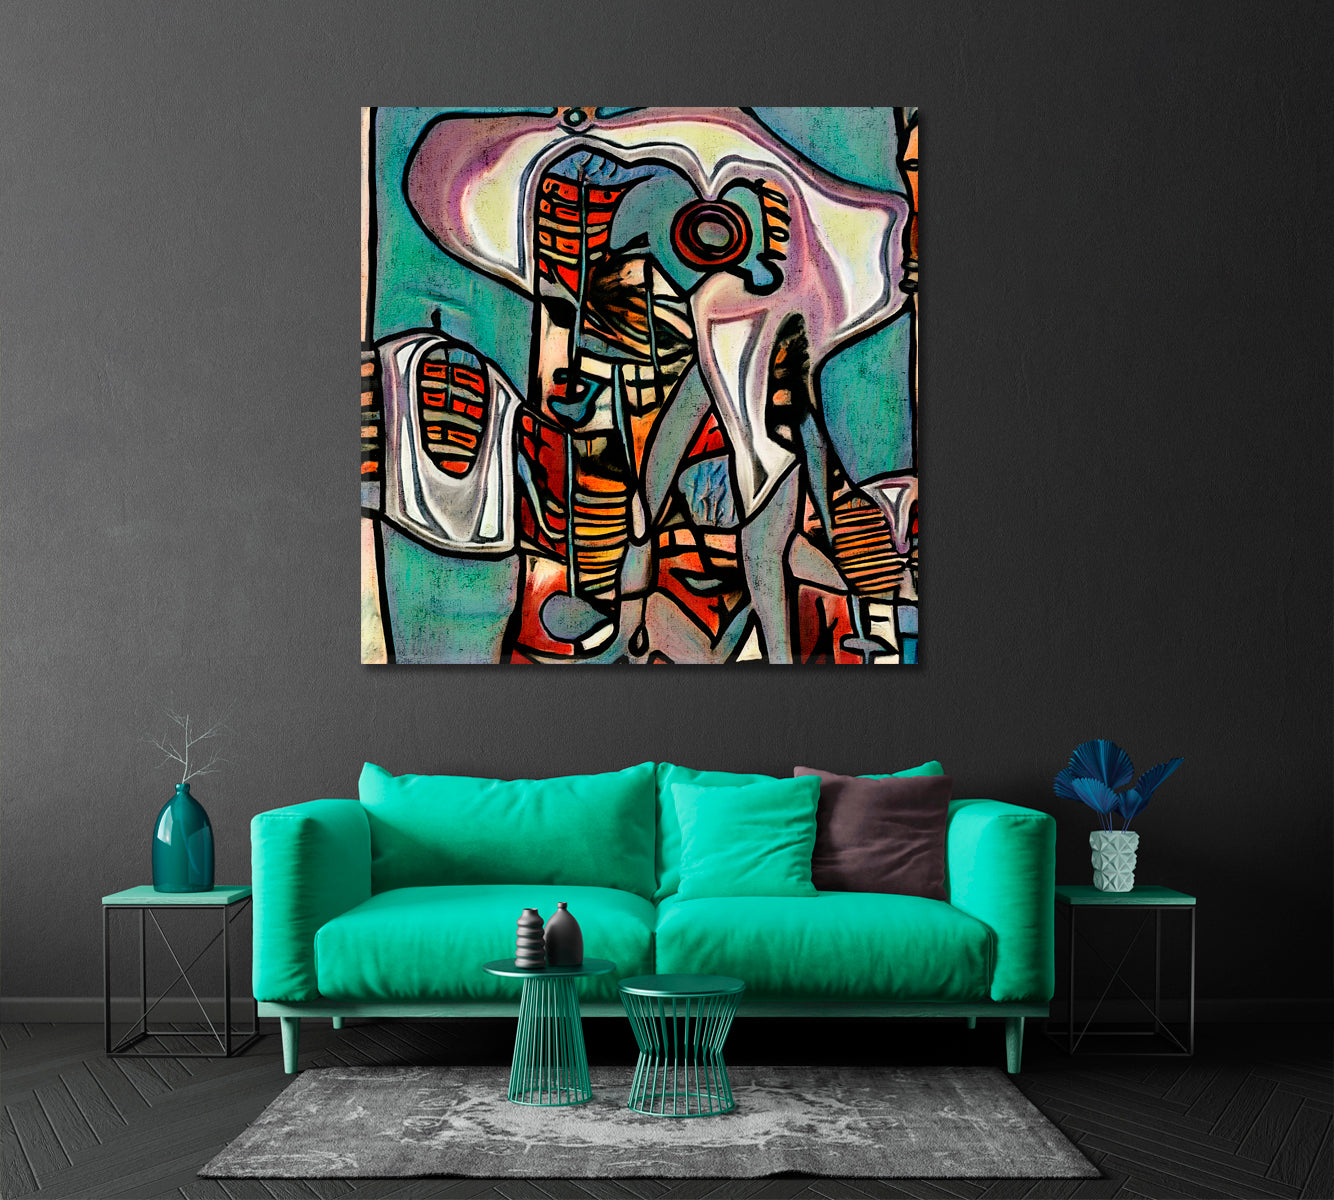 INSPIRED BY PICASSO Surreal Portrait Modern Abstraction Cubism Contemporary Art Artesty   